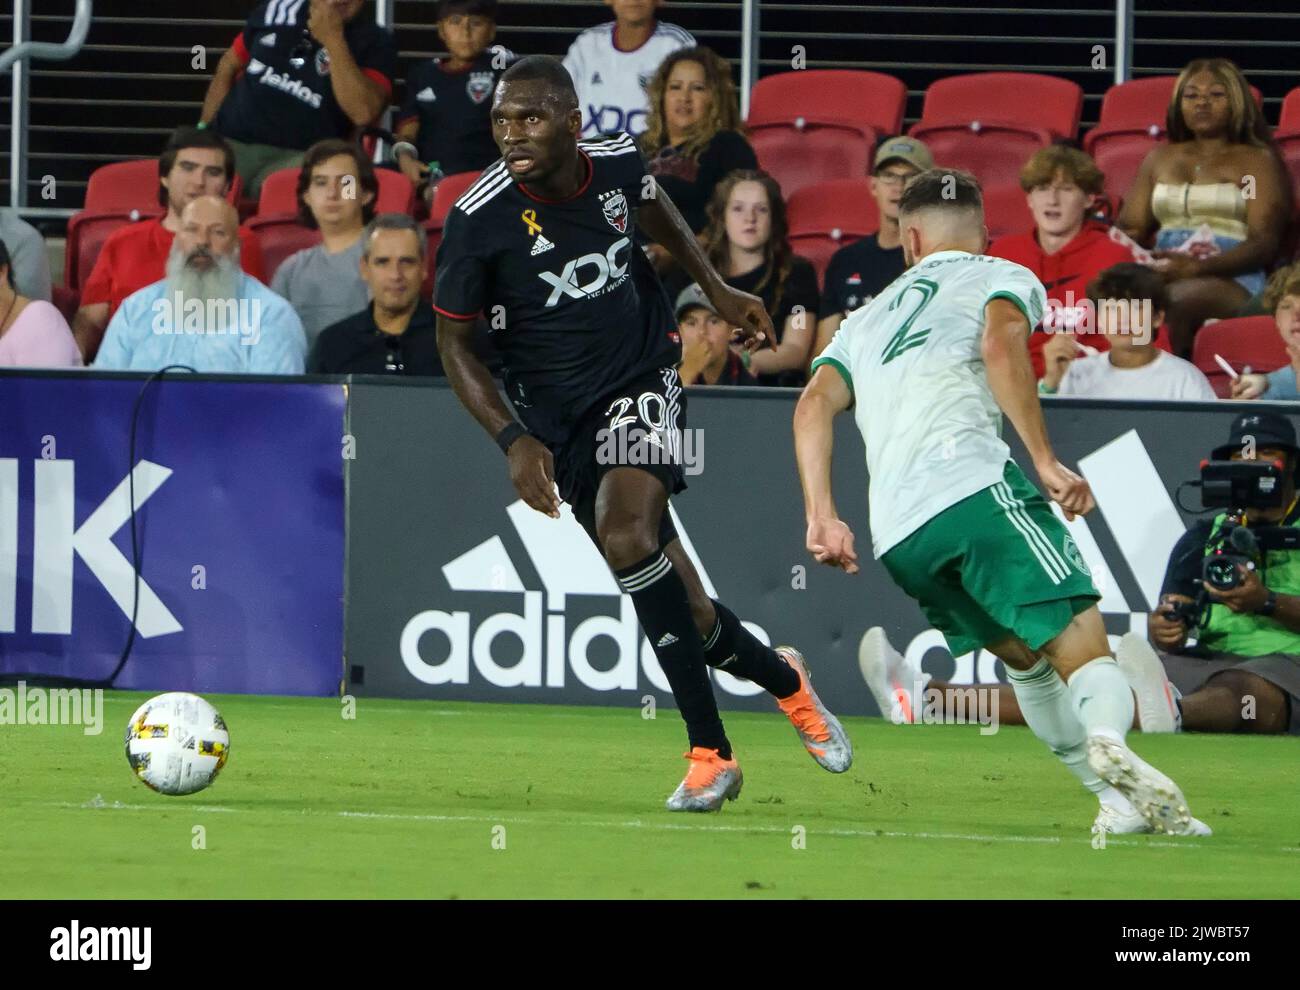 WASHINGTON, DC, USA - 4 SEPTEMBER 2022: Colorado Rapids defender Keegan Rosenberry (2) defends against D.C. United forward Christian Benteke (20) during a MLS match between D.C United and the Colorado Rapids, on September 04, 2022, at Audi Field, in Washington, DC. (Photo by Tony Quinn-Alamy Live News) Stock Photo